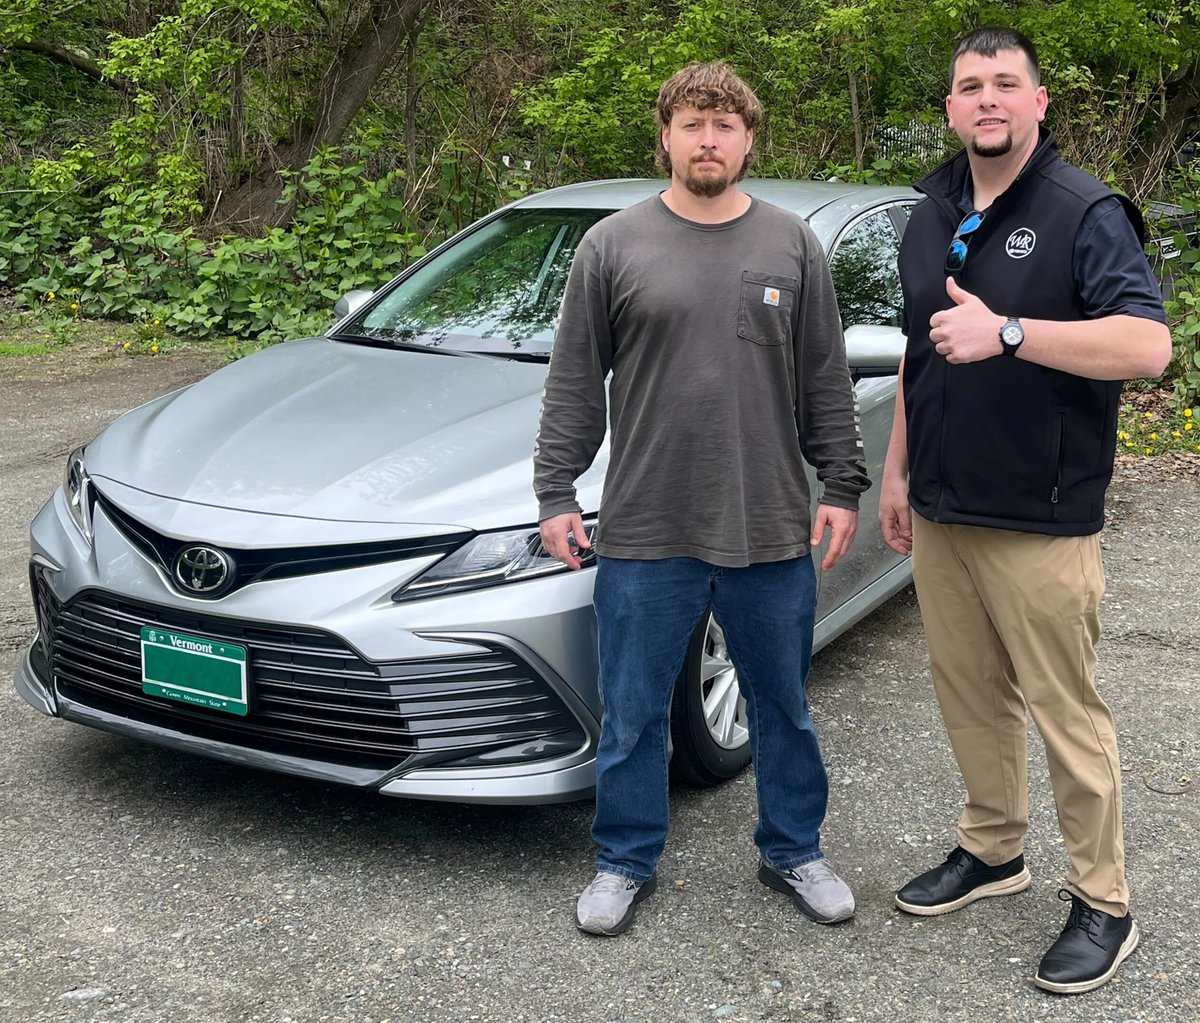 Happy #NewCarDay to Josh! He is the proud member of the @Toyota #CamryClub, after taking home this sweet 2023 model, picked out with some help from Tyler Gillis - Congrats!

Learn more about Tyler & check out his reviews @DealerRater bit.ly/4aXbyvL

#Toyota #LetsGoPlaces